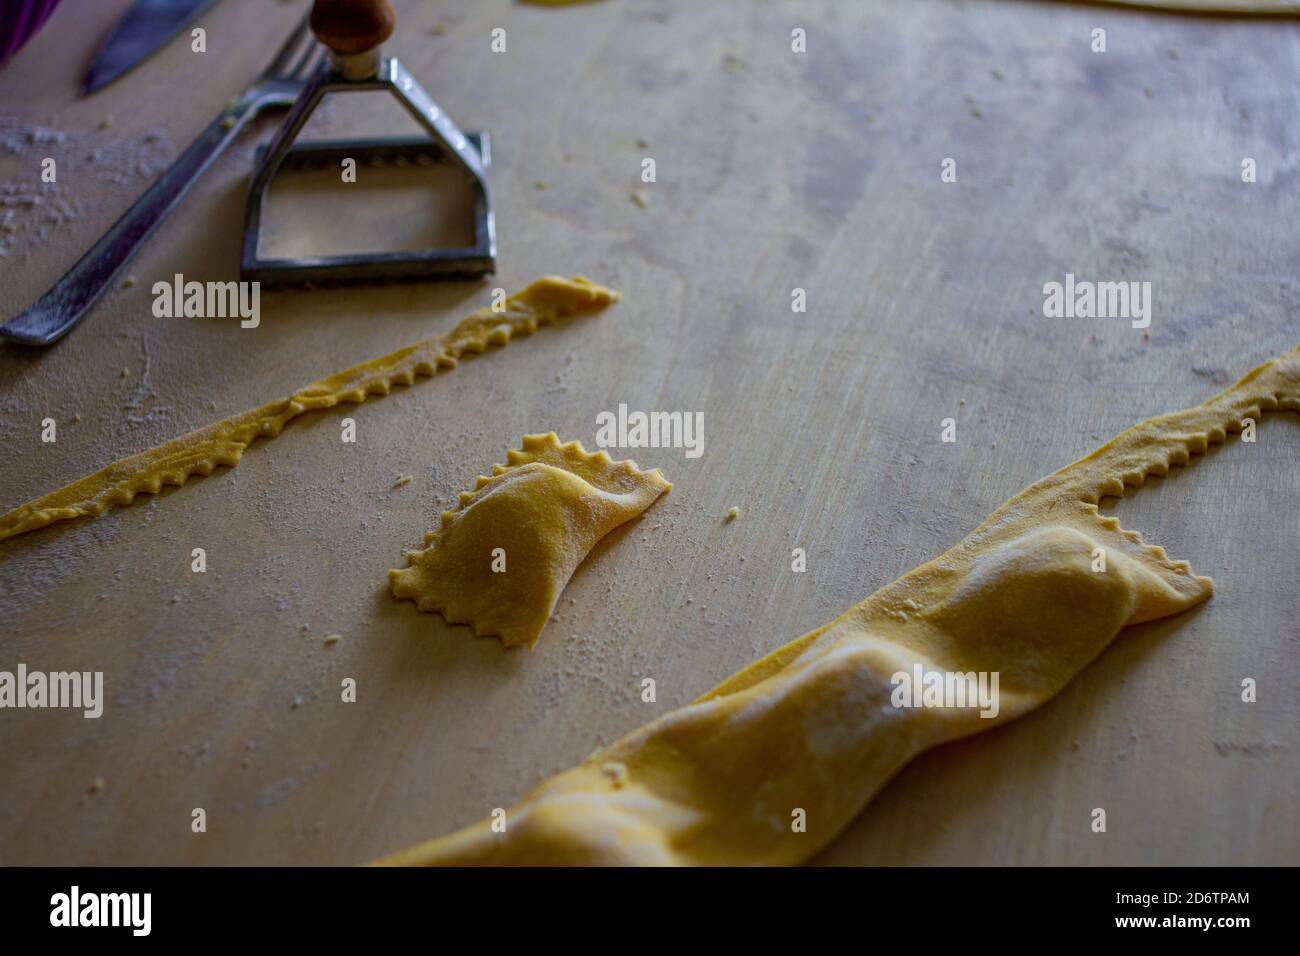 The preparation of tortelli with pasta. Typical dish of Emilian - Italian cuisine. Stock Photo